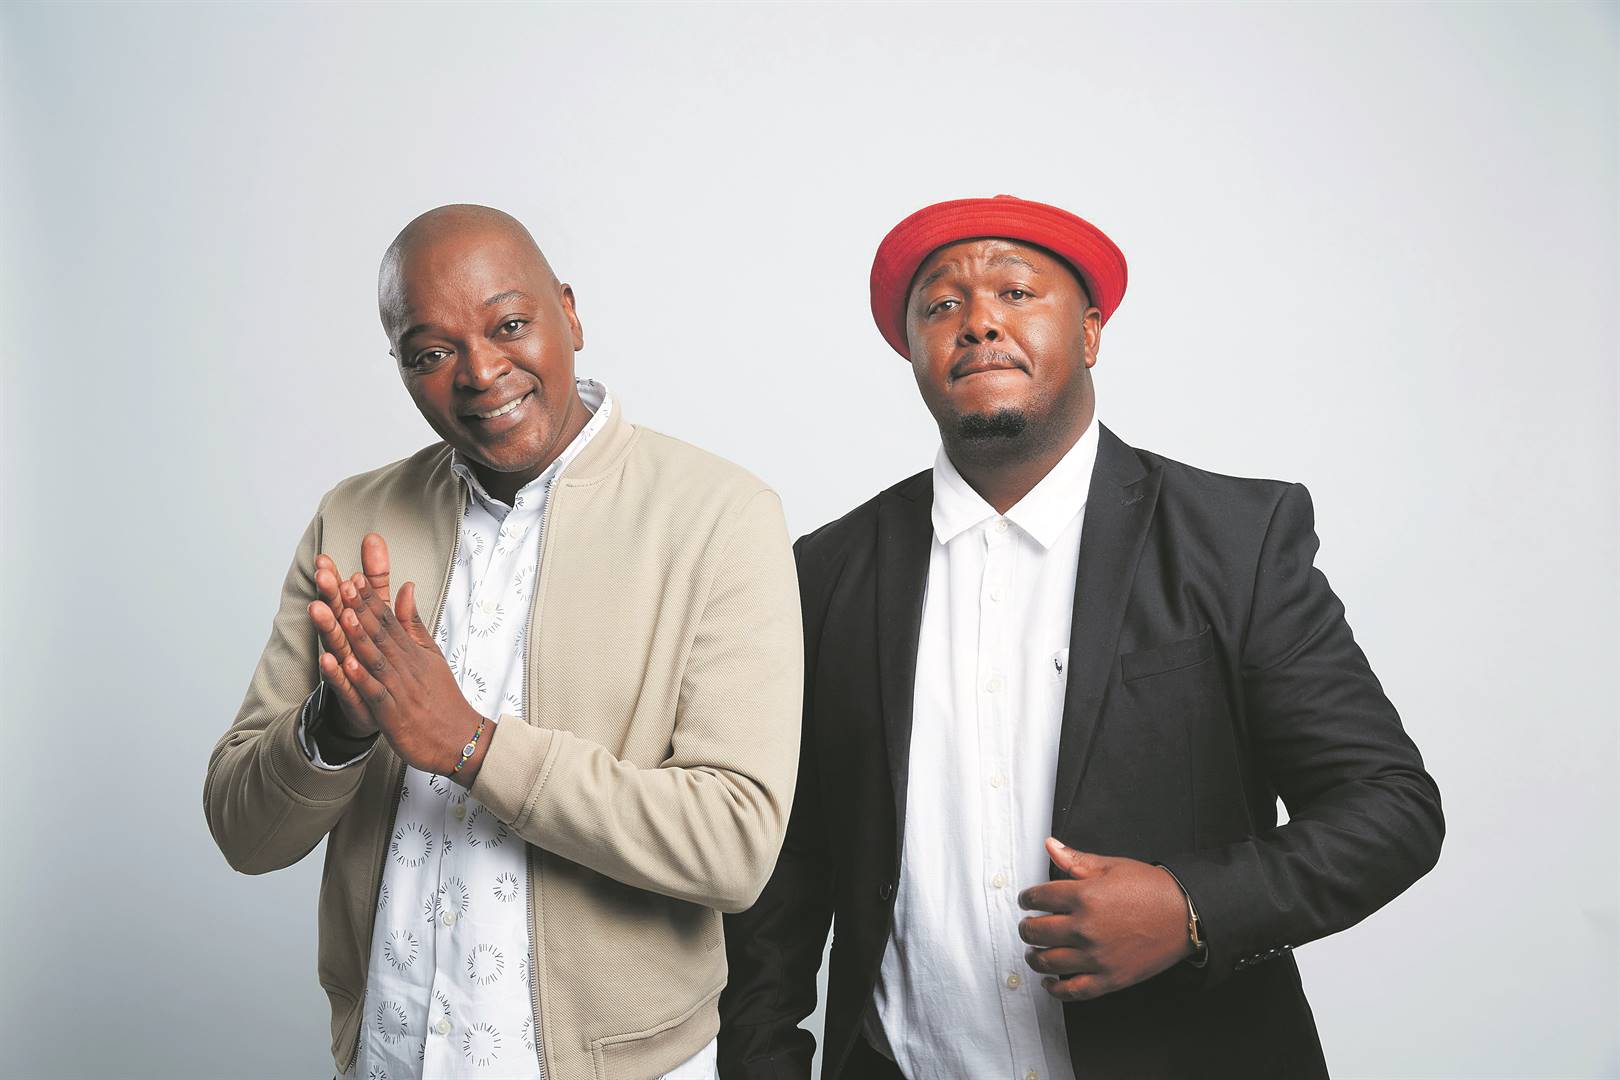 Kaya 959 listeners weren't happy when they couldn't find Thomas and Skhumba on radio in the morning.